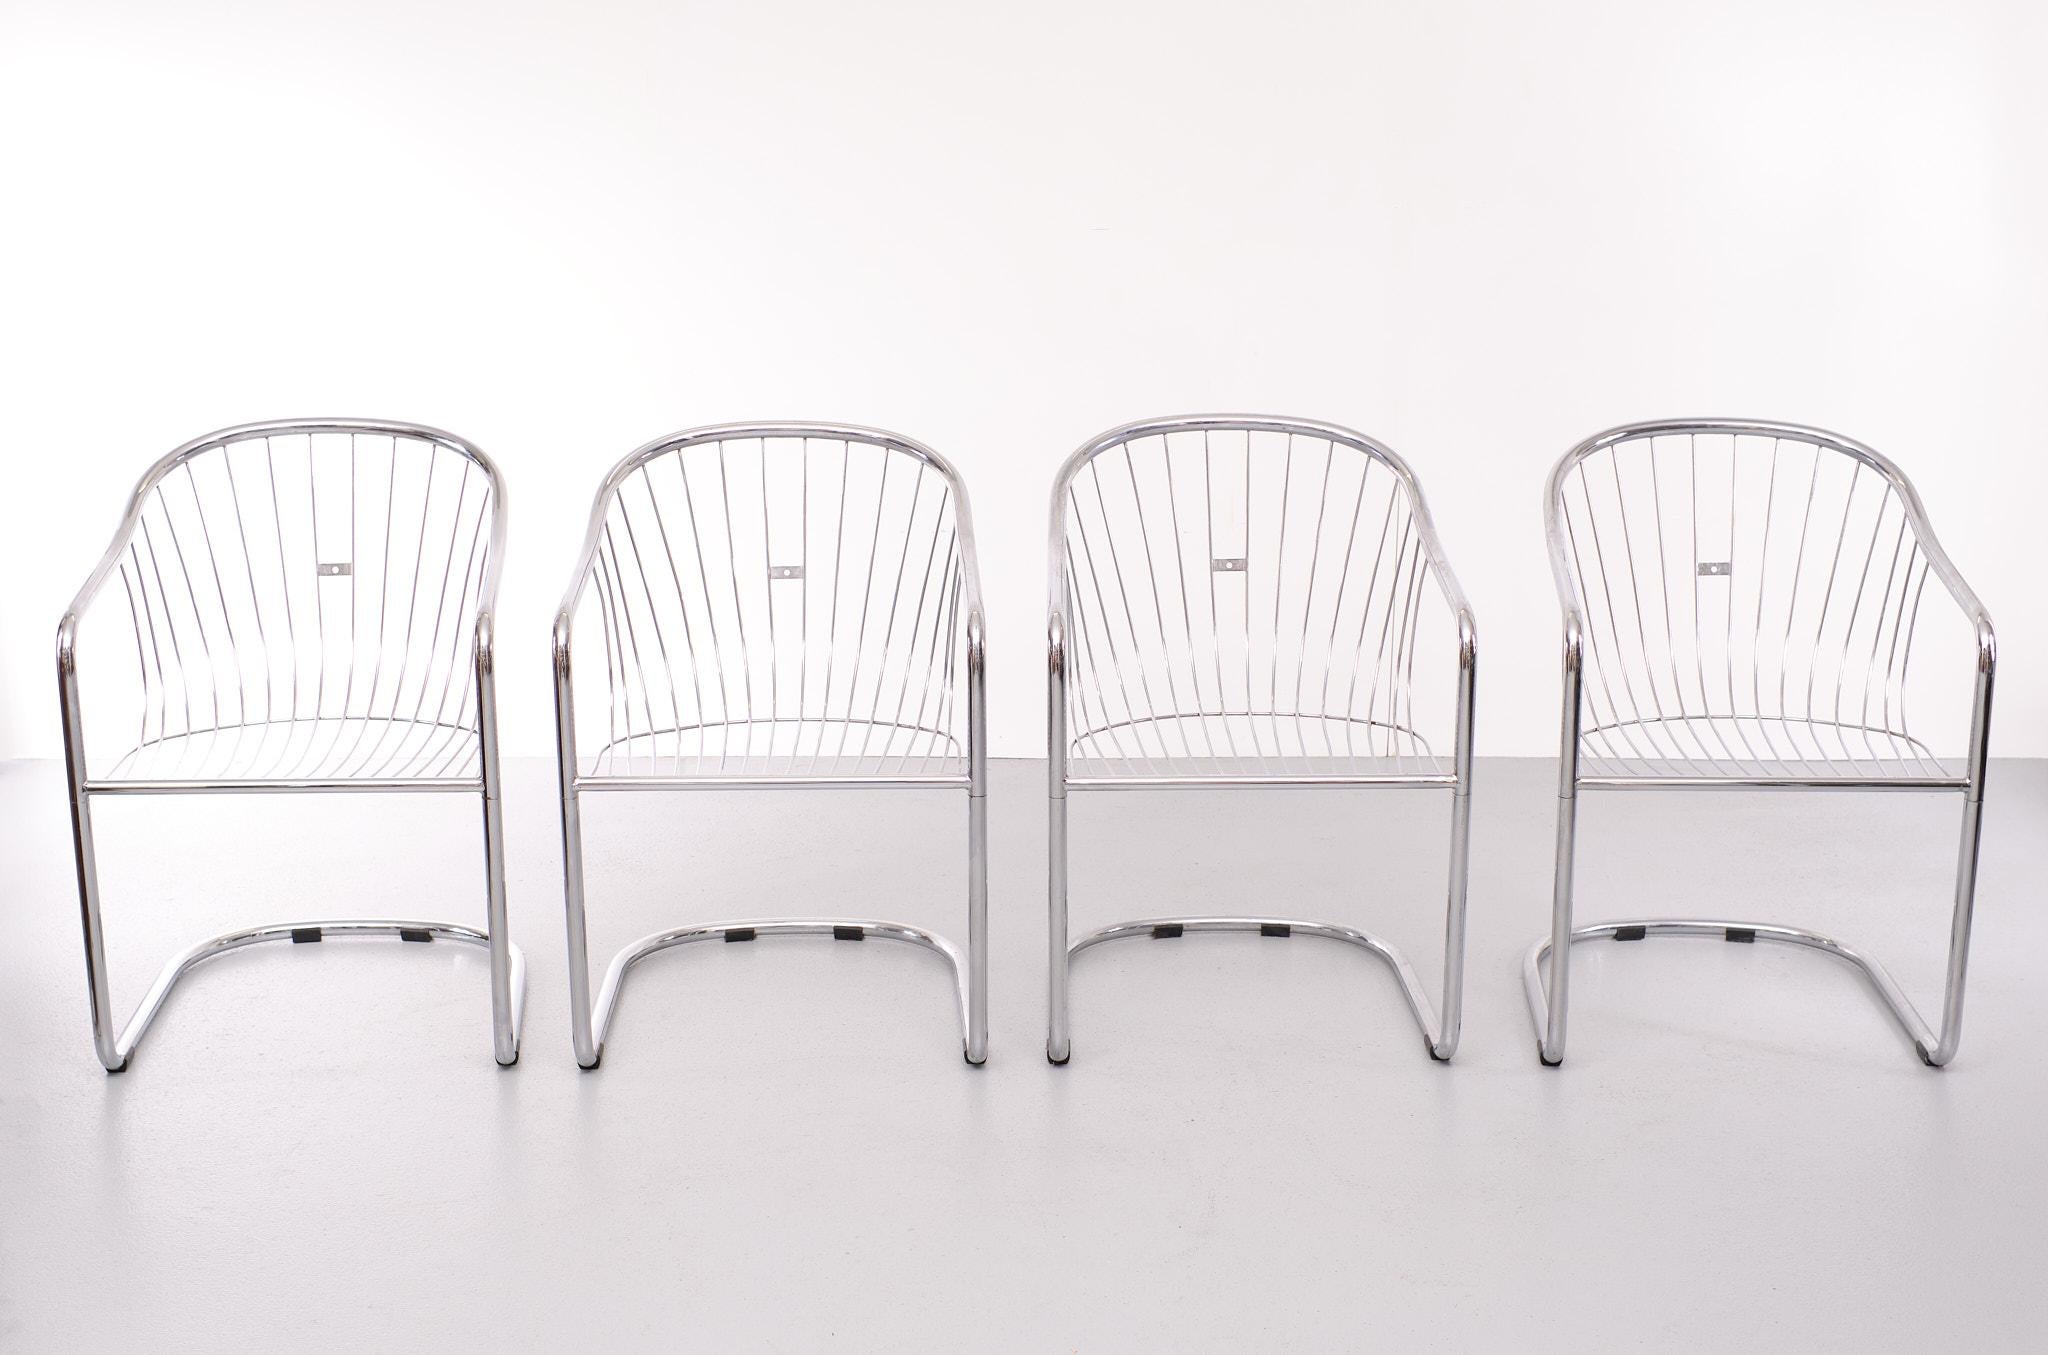 Late 20th Century Dining Chairs Gastone Rinaldi for RIMA, 1970s Italy